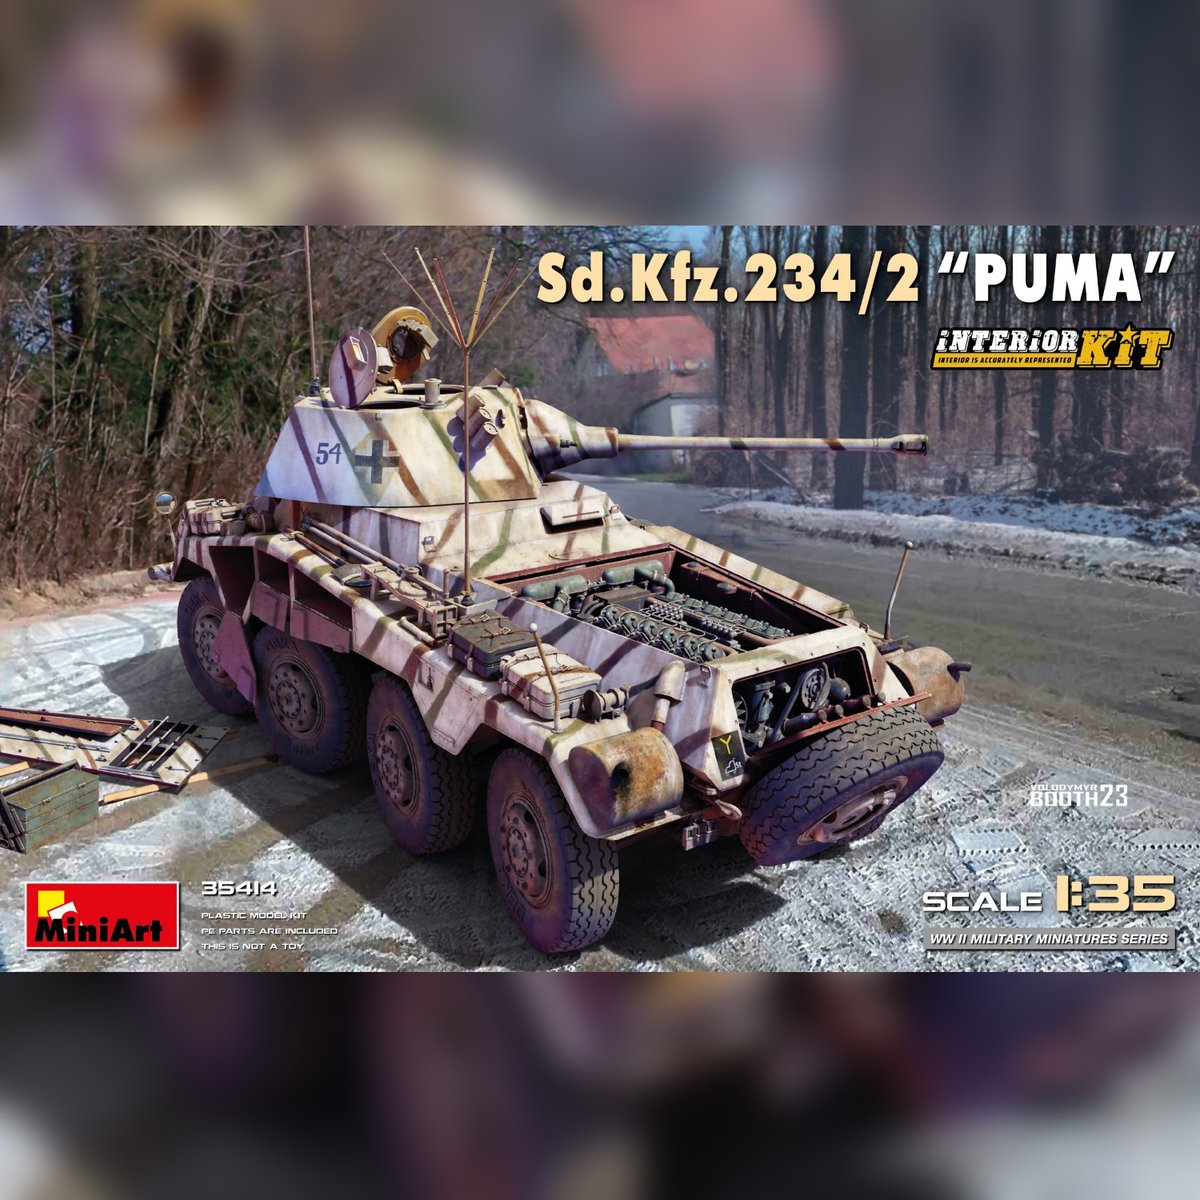 😍NEW PHOTOS OF BUILD UP KIT: 35414 SD.KFZ.234/2 PUMA. FULL INTERIOR. If you want to see more visit our Facebook or Instagram account! instagram.com/miniart_models/